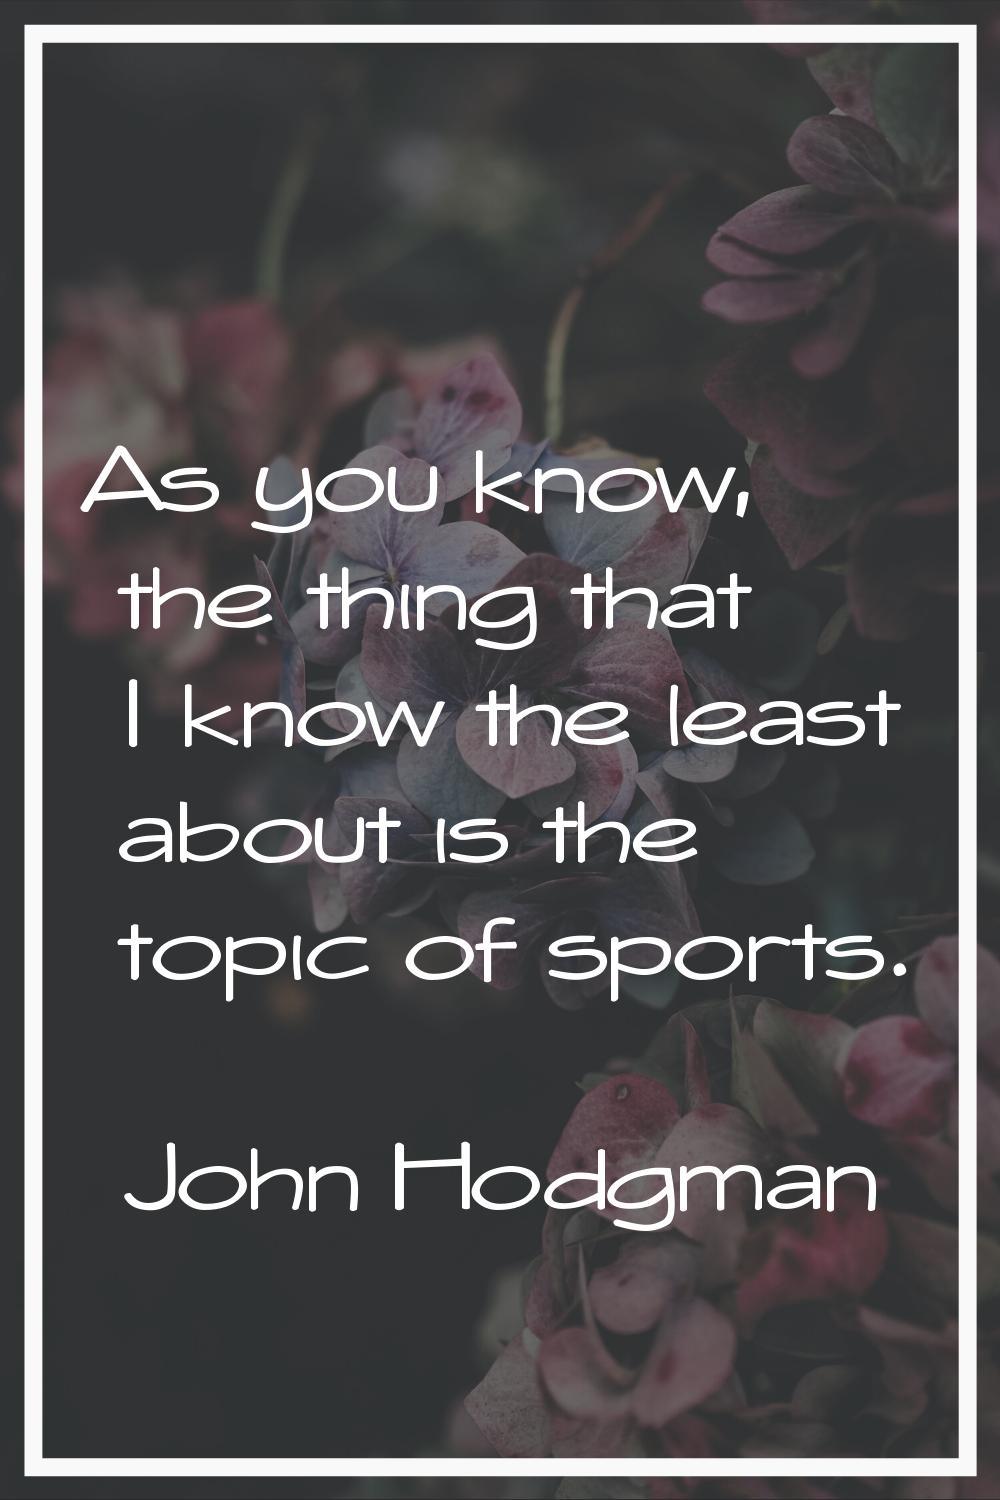 As you know, the thing that I know the least about is the topic of sports.